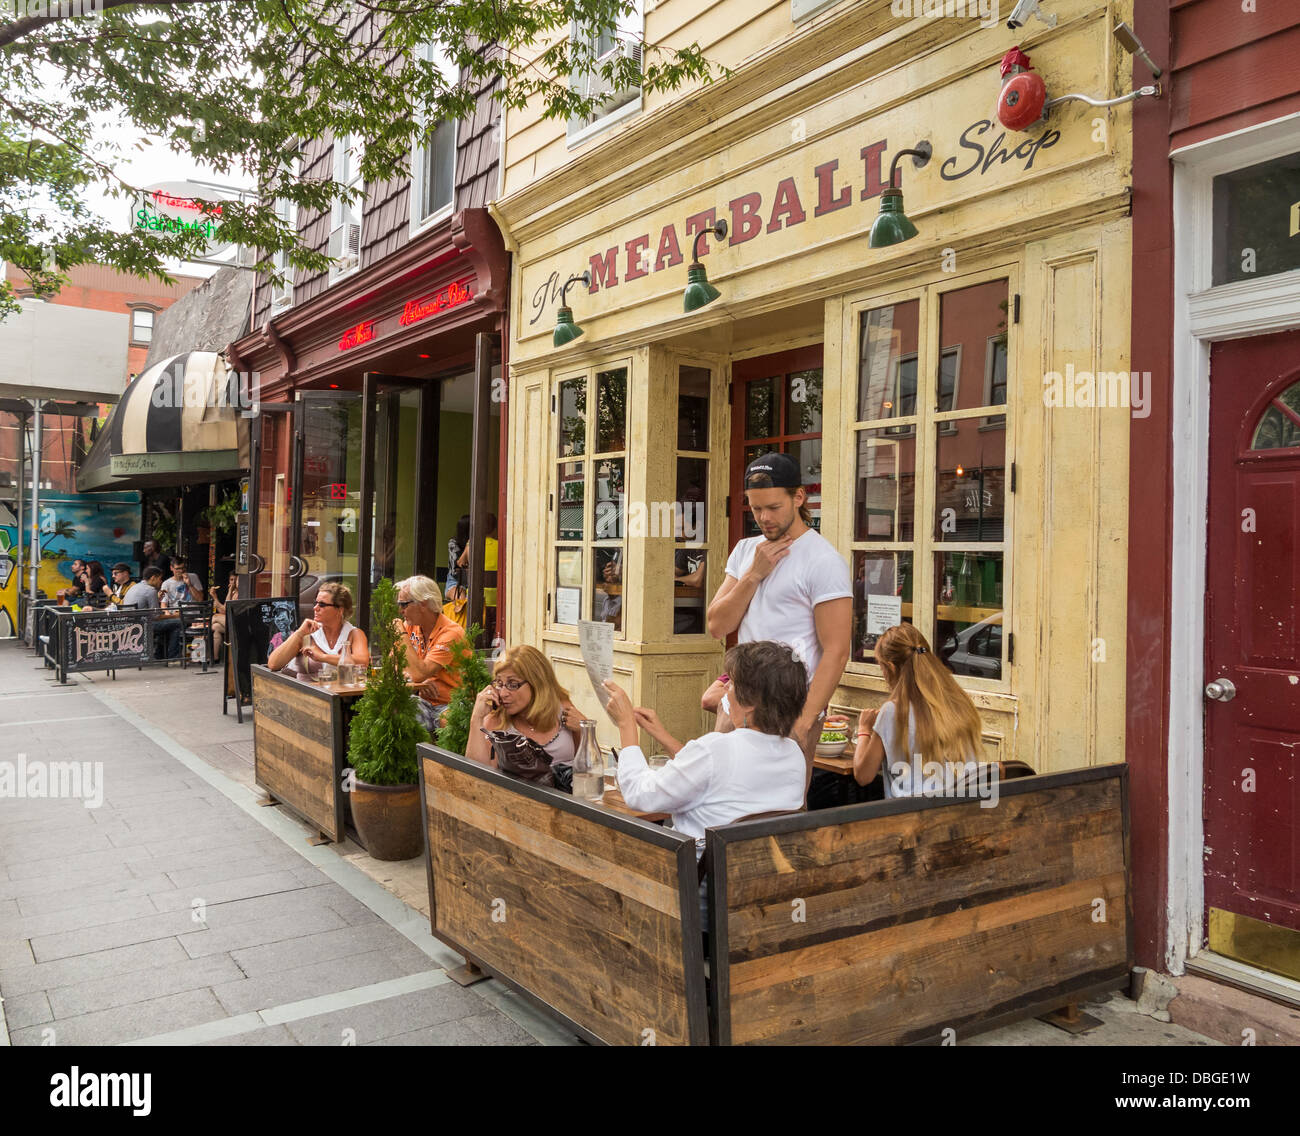 Pavement cafes in Williamsburg, Brooklyn, New York City, USA Stock Photo